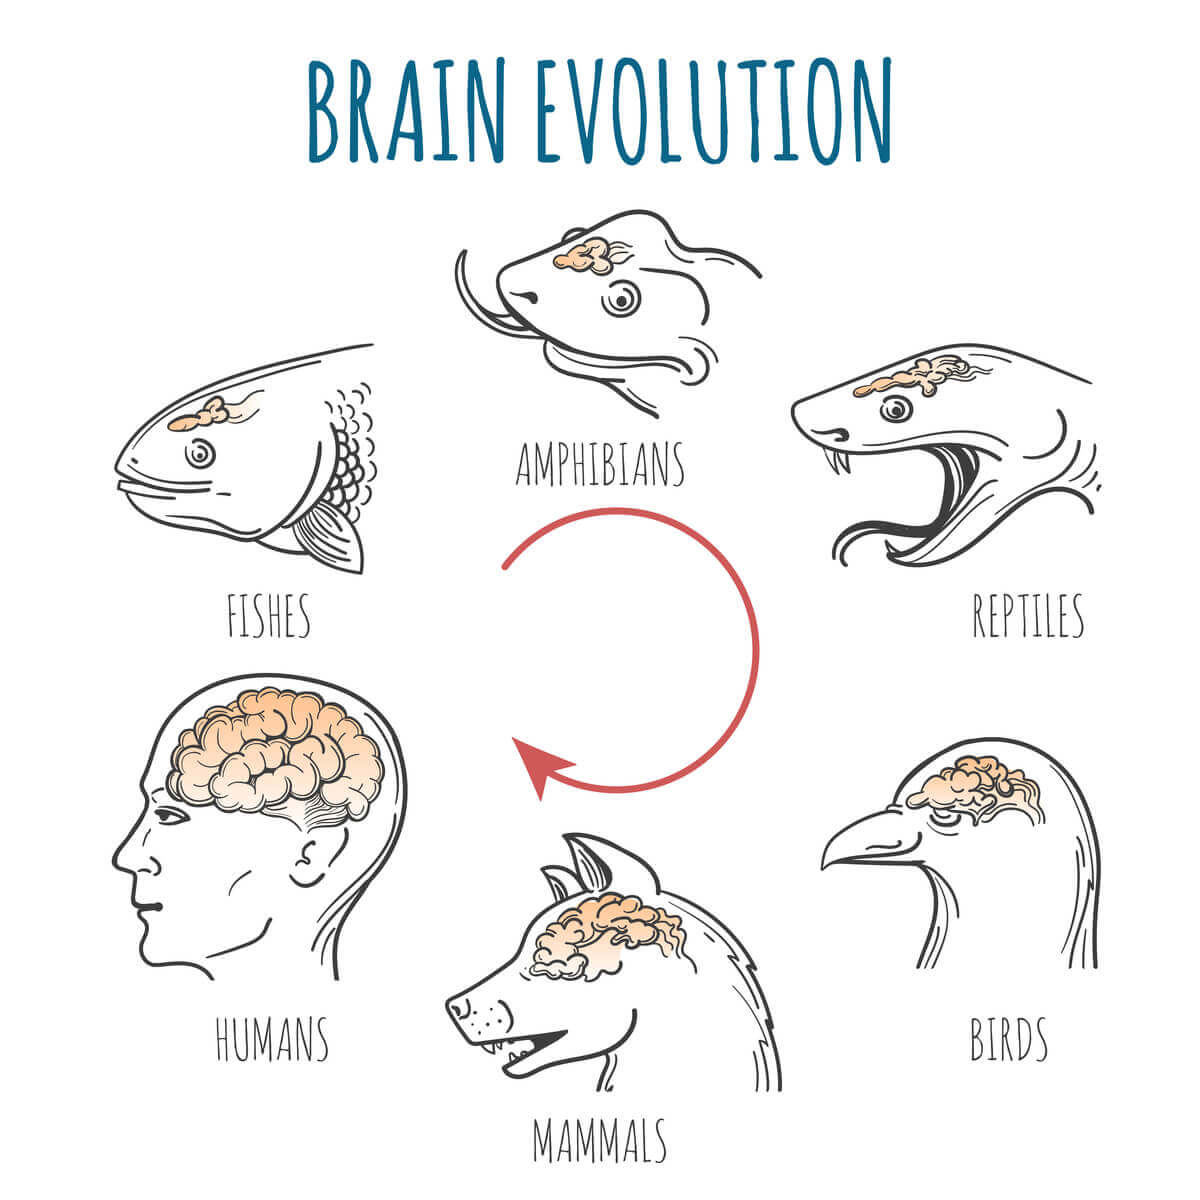 A diagram showing the evolution of the brain.